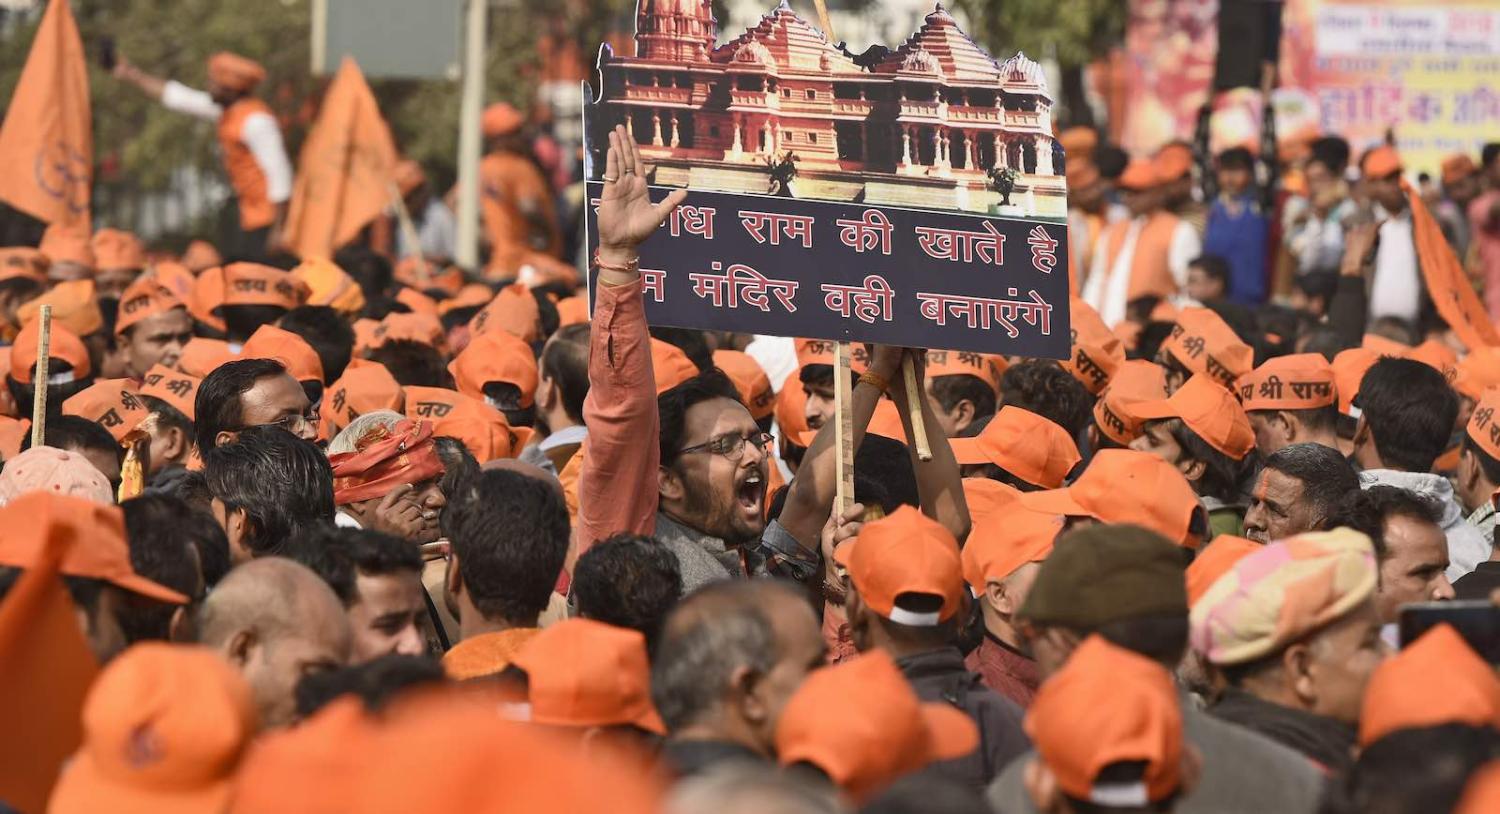 Supporters of the Vishva Hindu Parishad press their demands for the construction of Ram Temple in Ayodhya (Photo: Burhaan Kinu via Getty)